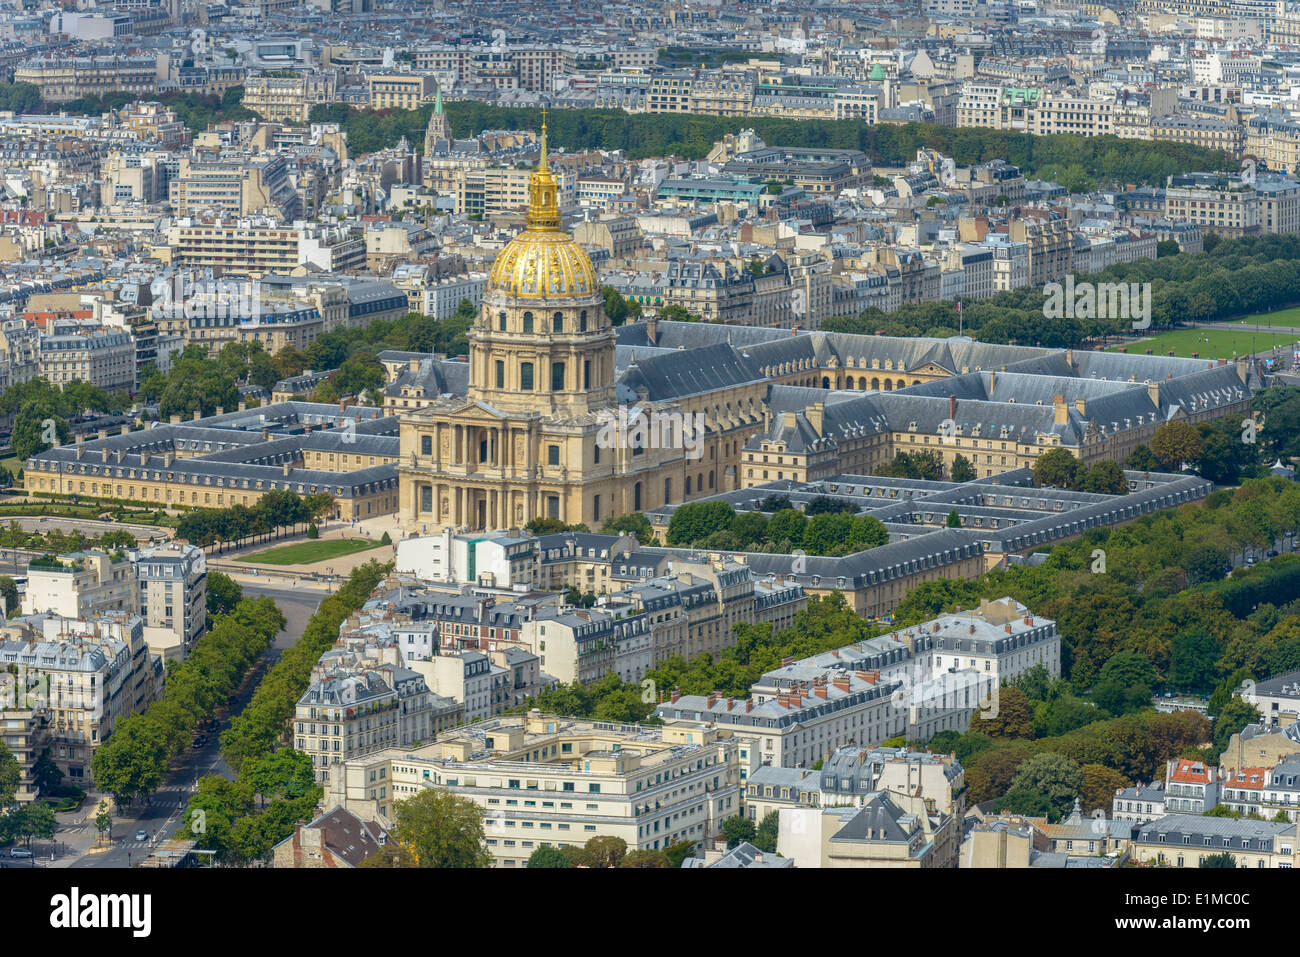 Aerial view of Les Invalides taken from Montparnasse Tower Stock Photo